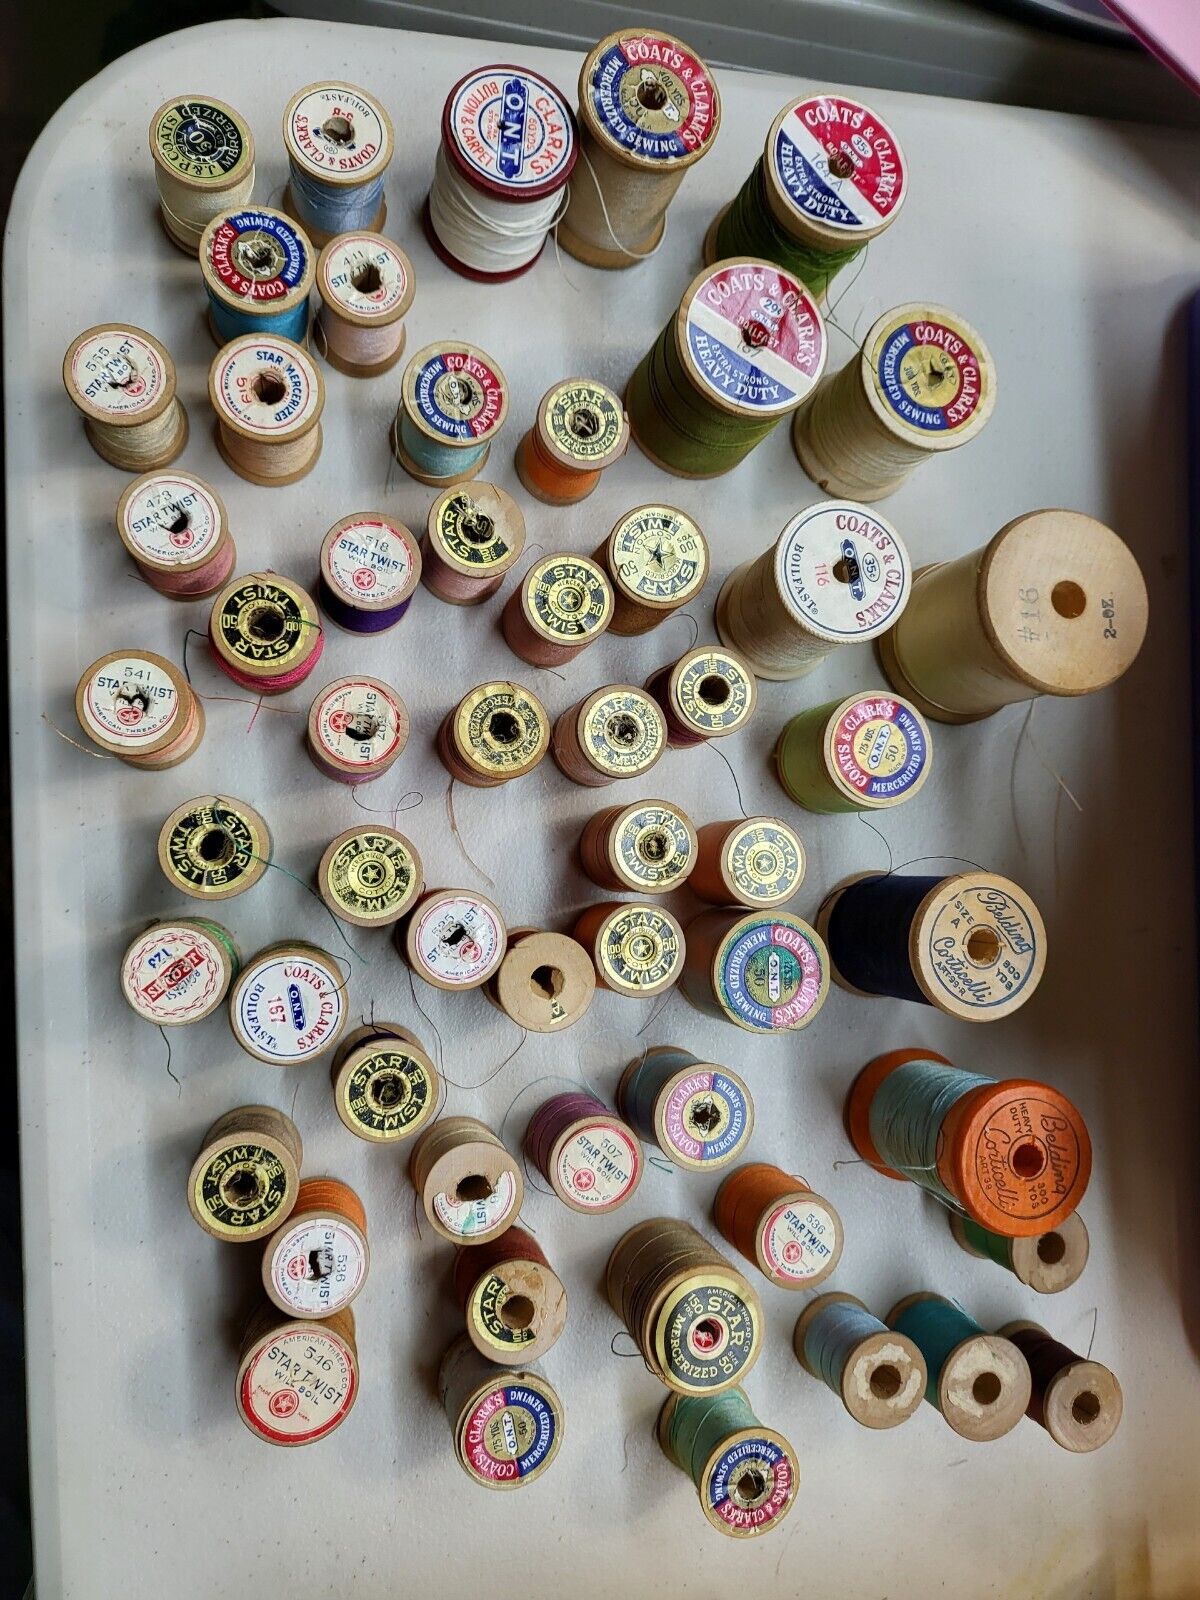 Lot of 53 Vintage Wooden Spools of Thread Sewing Antique Cotton Color Variety